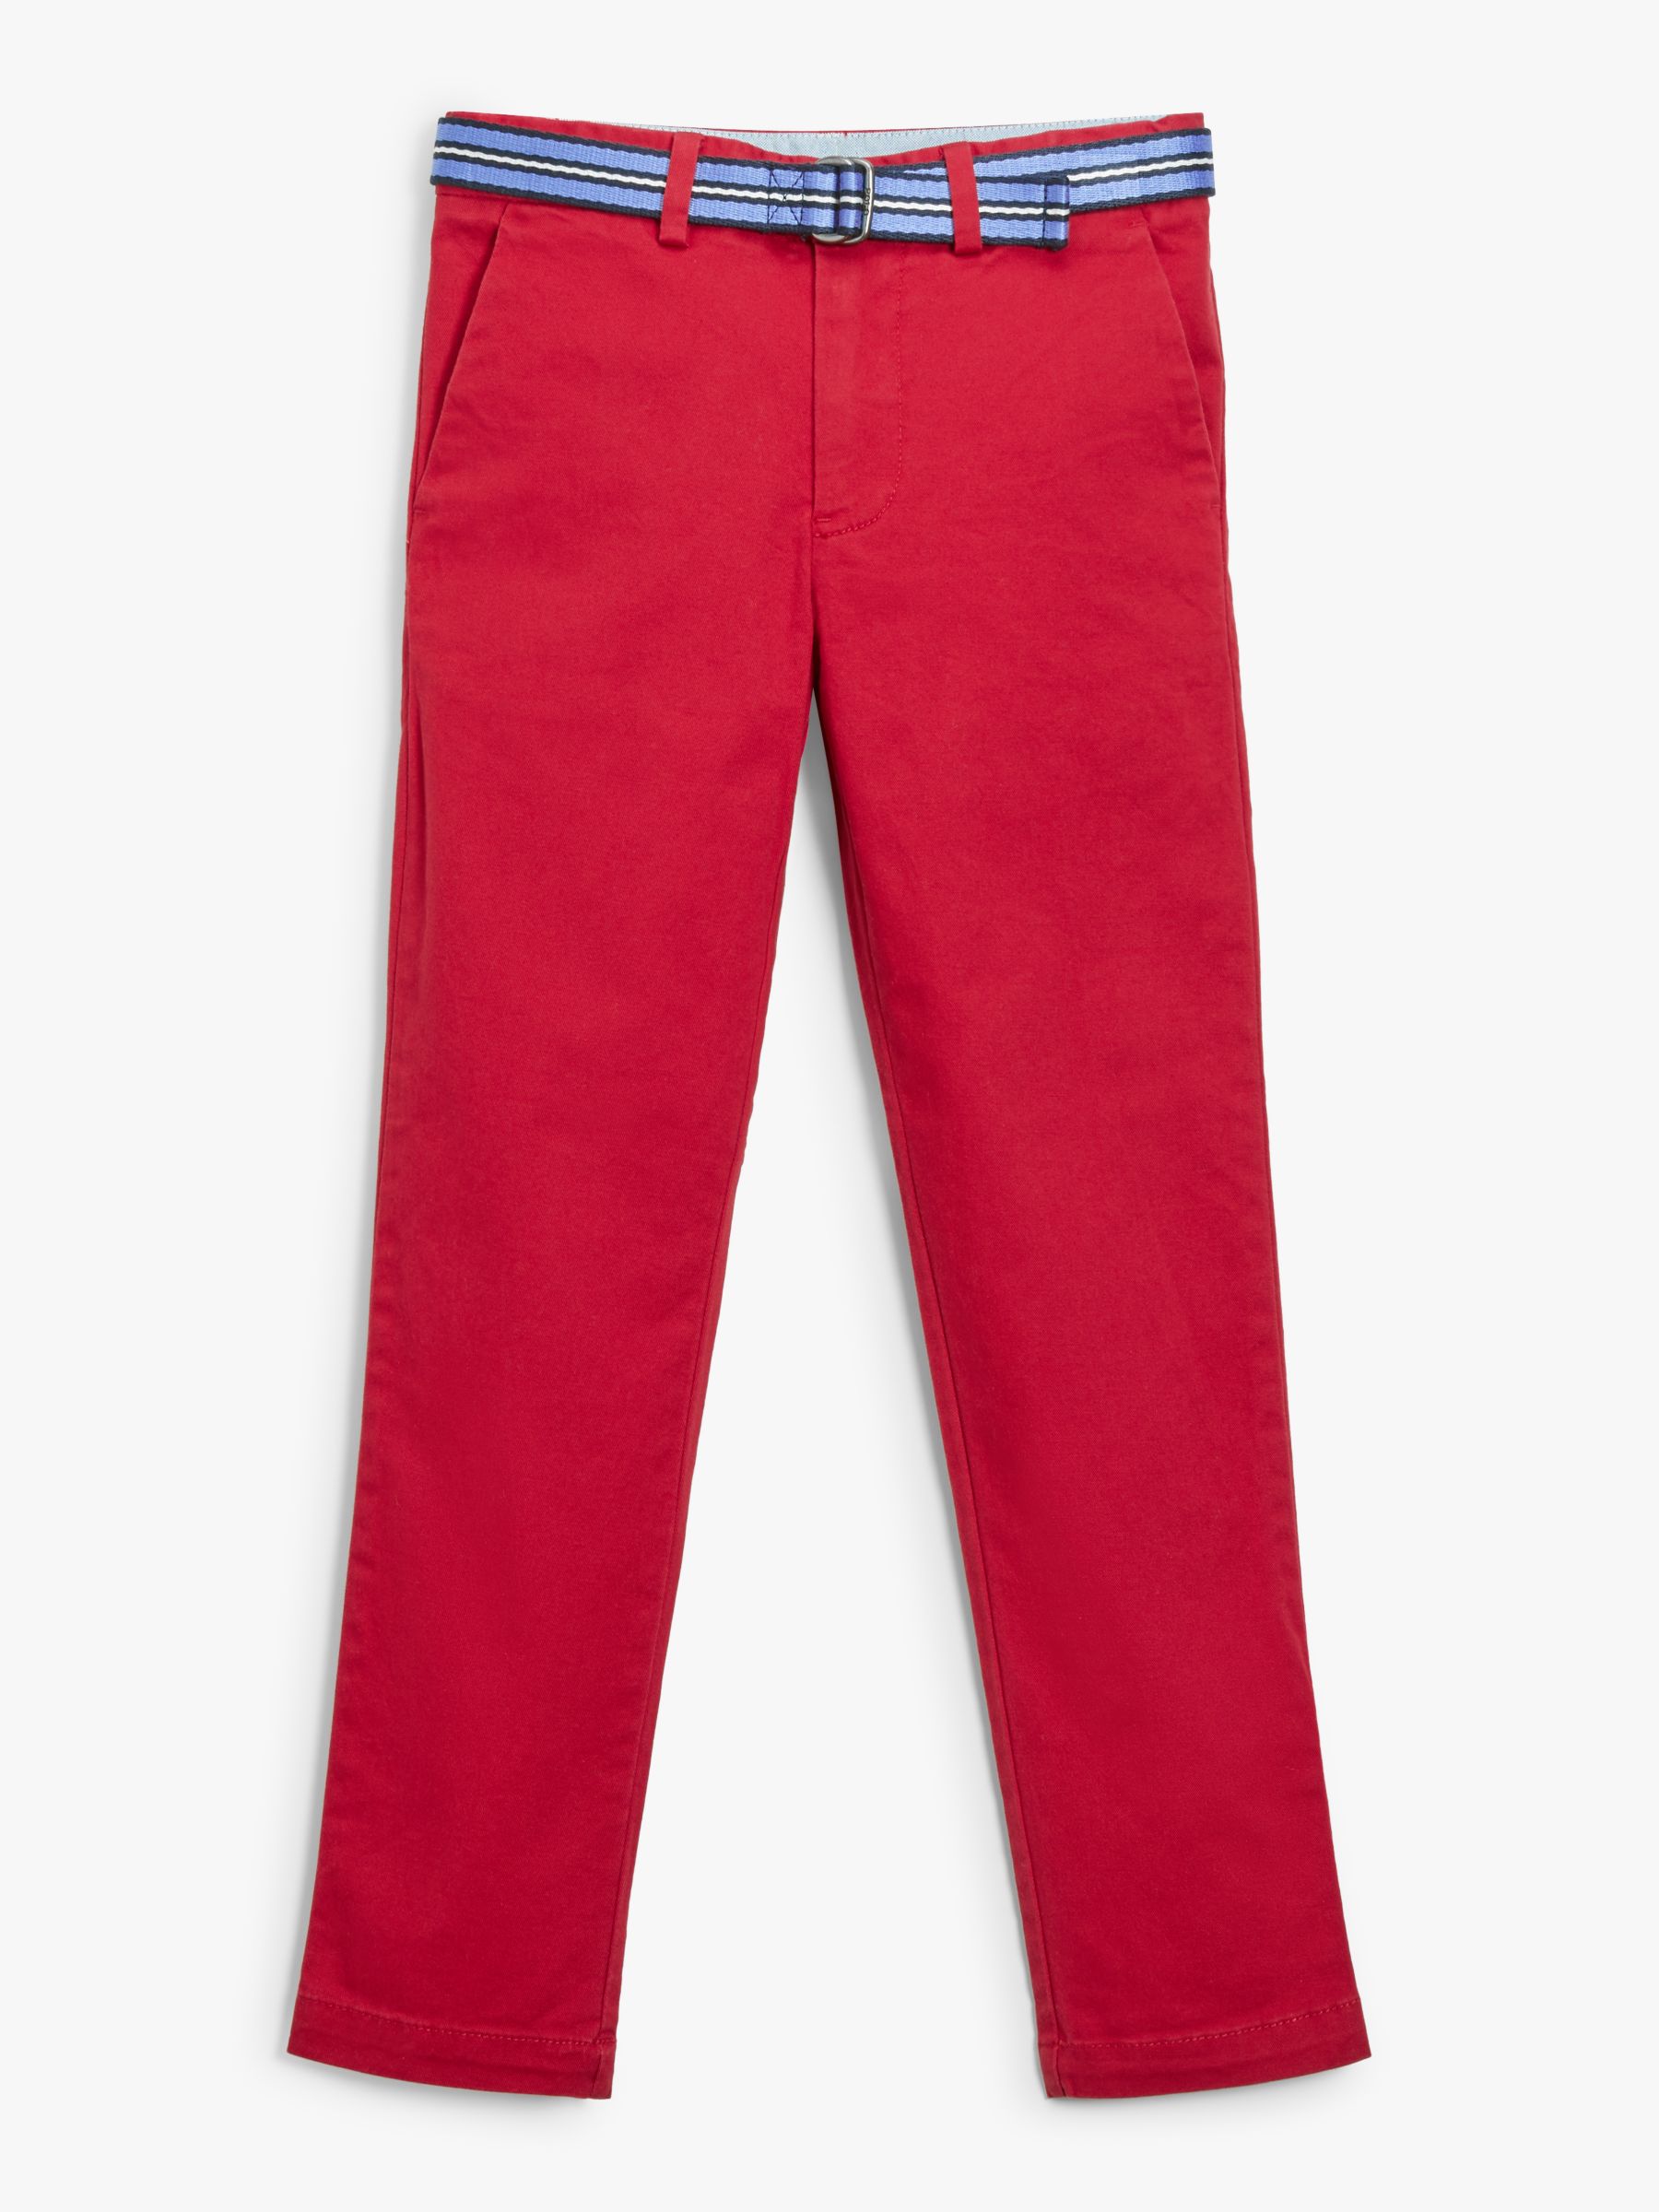 Image of Polo Ralph Lauren Boys Preppy Trousers Red